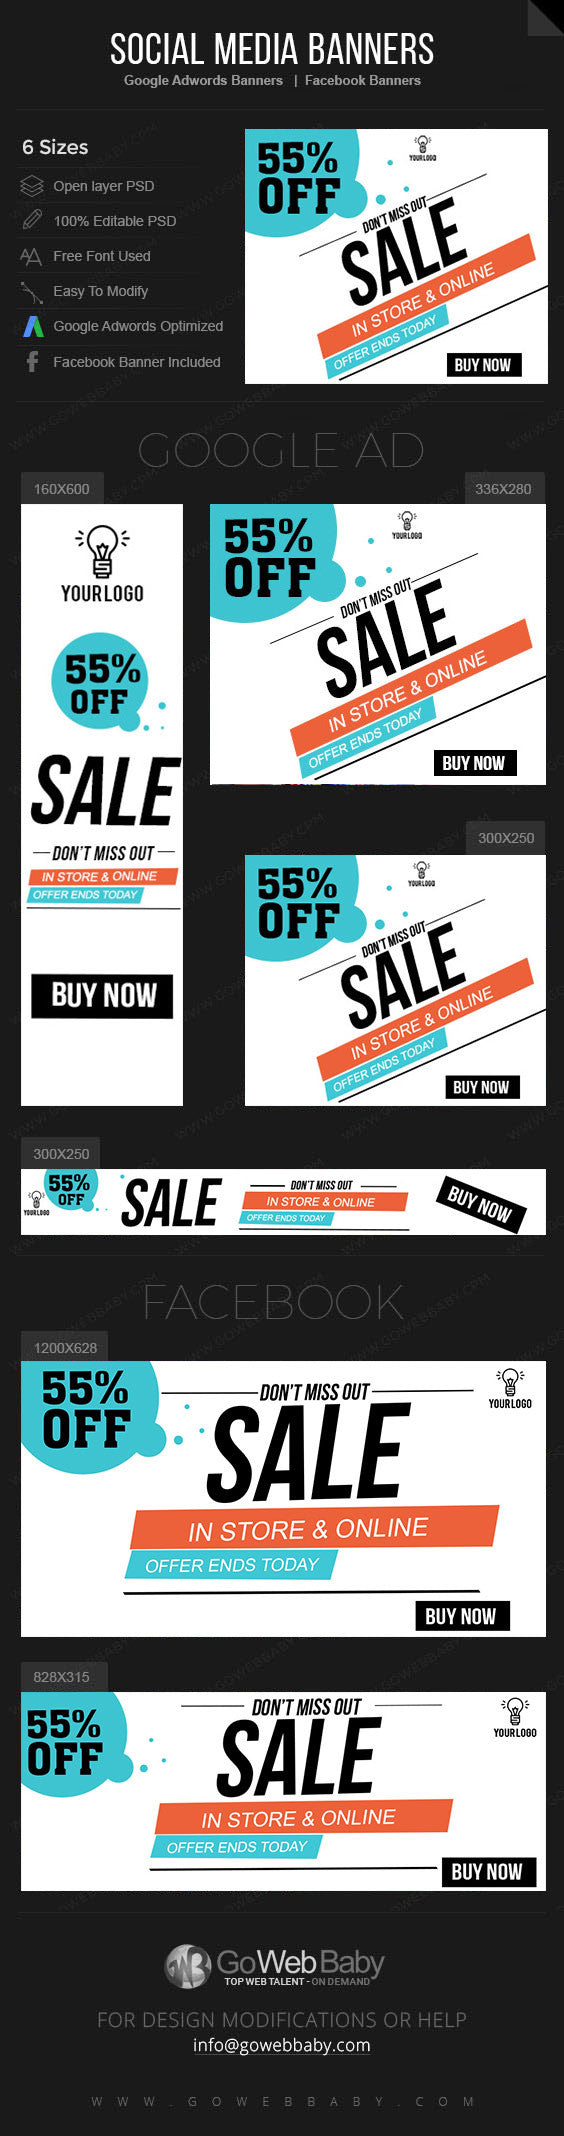 Google Adwords Display Banner with Facebook banners - Sale for  Website Marketing - GoWebBaby.Com